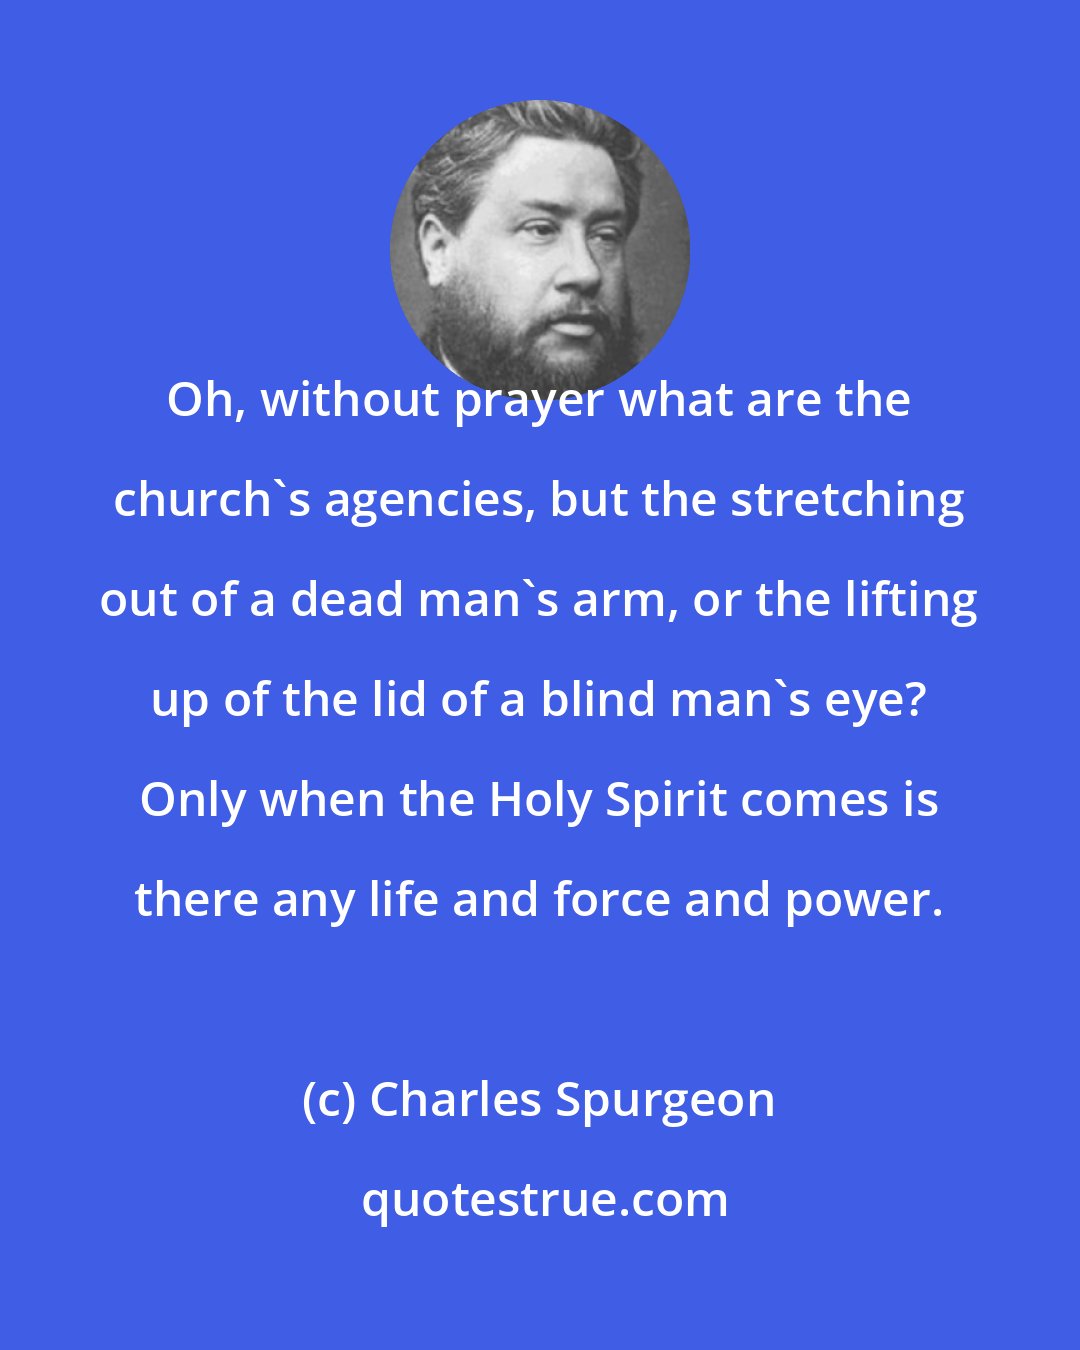 Charles Spurgeon: Oh, without prayer what are the church's agencies, but the stretching out of a dead man's arm, or the lifting up of the lid of a blind man's eye? Only when the Holy Spirit comes is there any life and force and power.